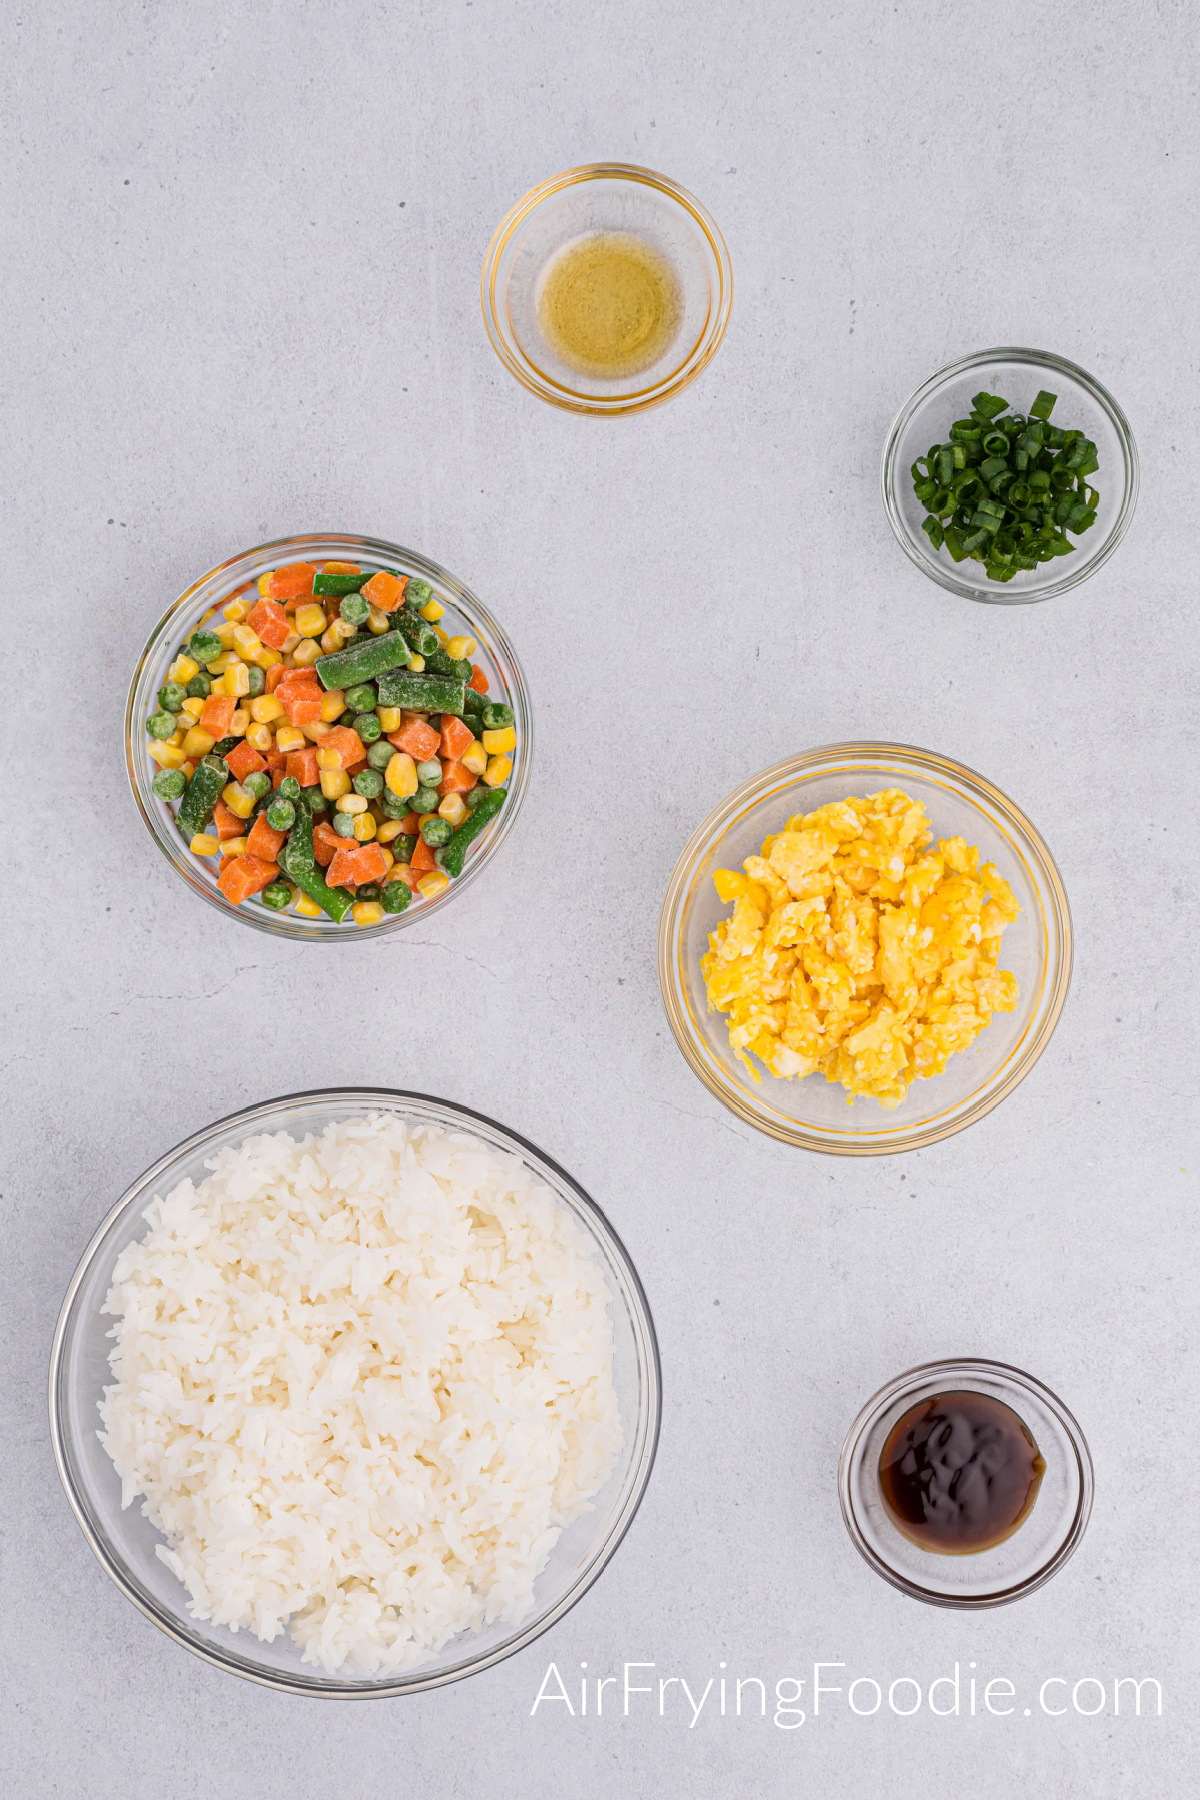 Overhead shot of the ingredients used to make air fryer fried rice. Three small glass bowls contain sesame oil, green onions, and oyster sauce. Two medium glass bowls have mixed vegetables, and the other includes eggs—one large bowl of white rice.